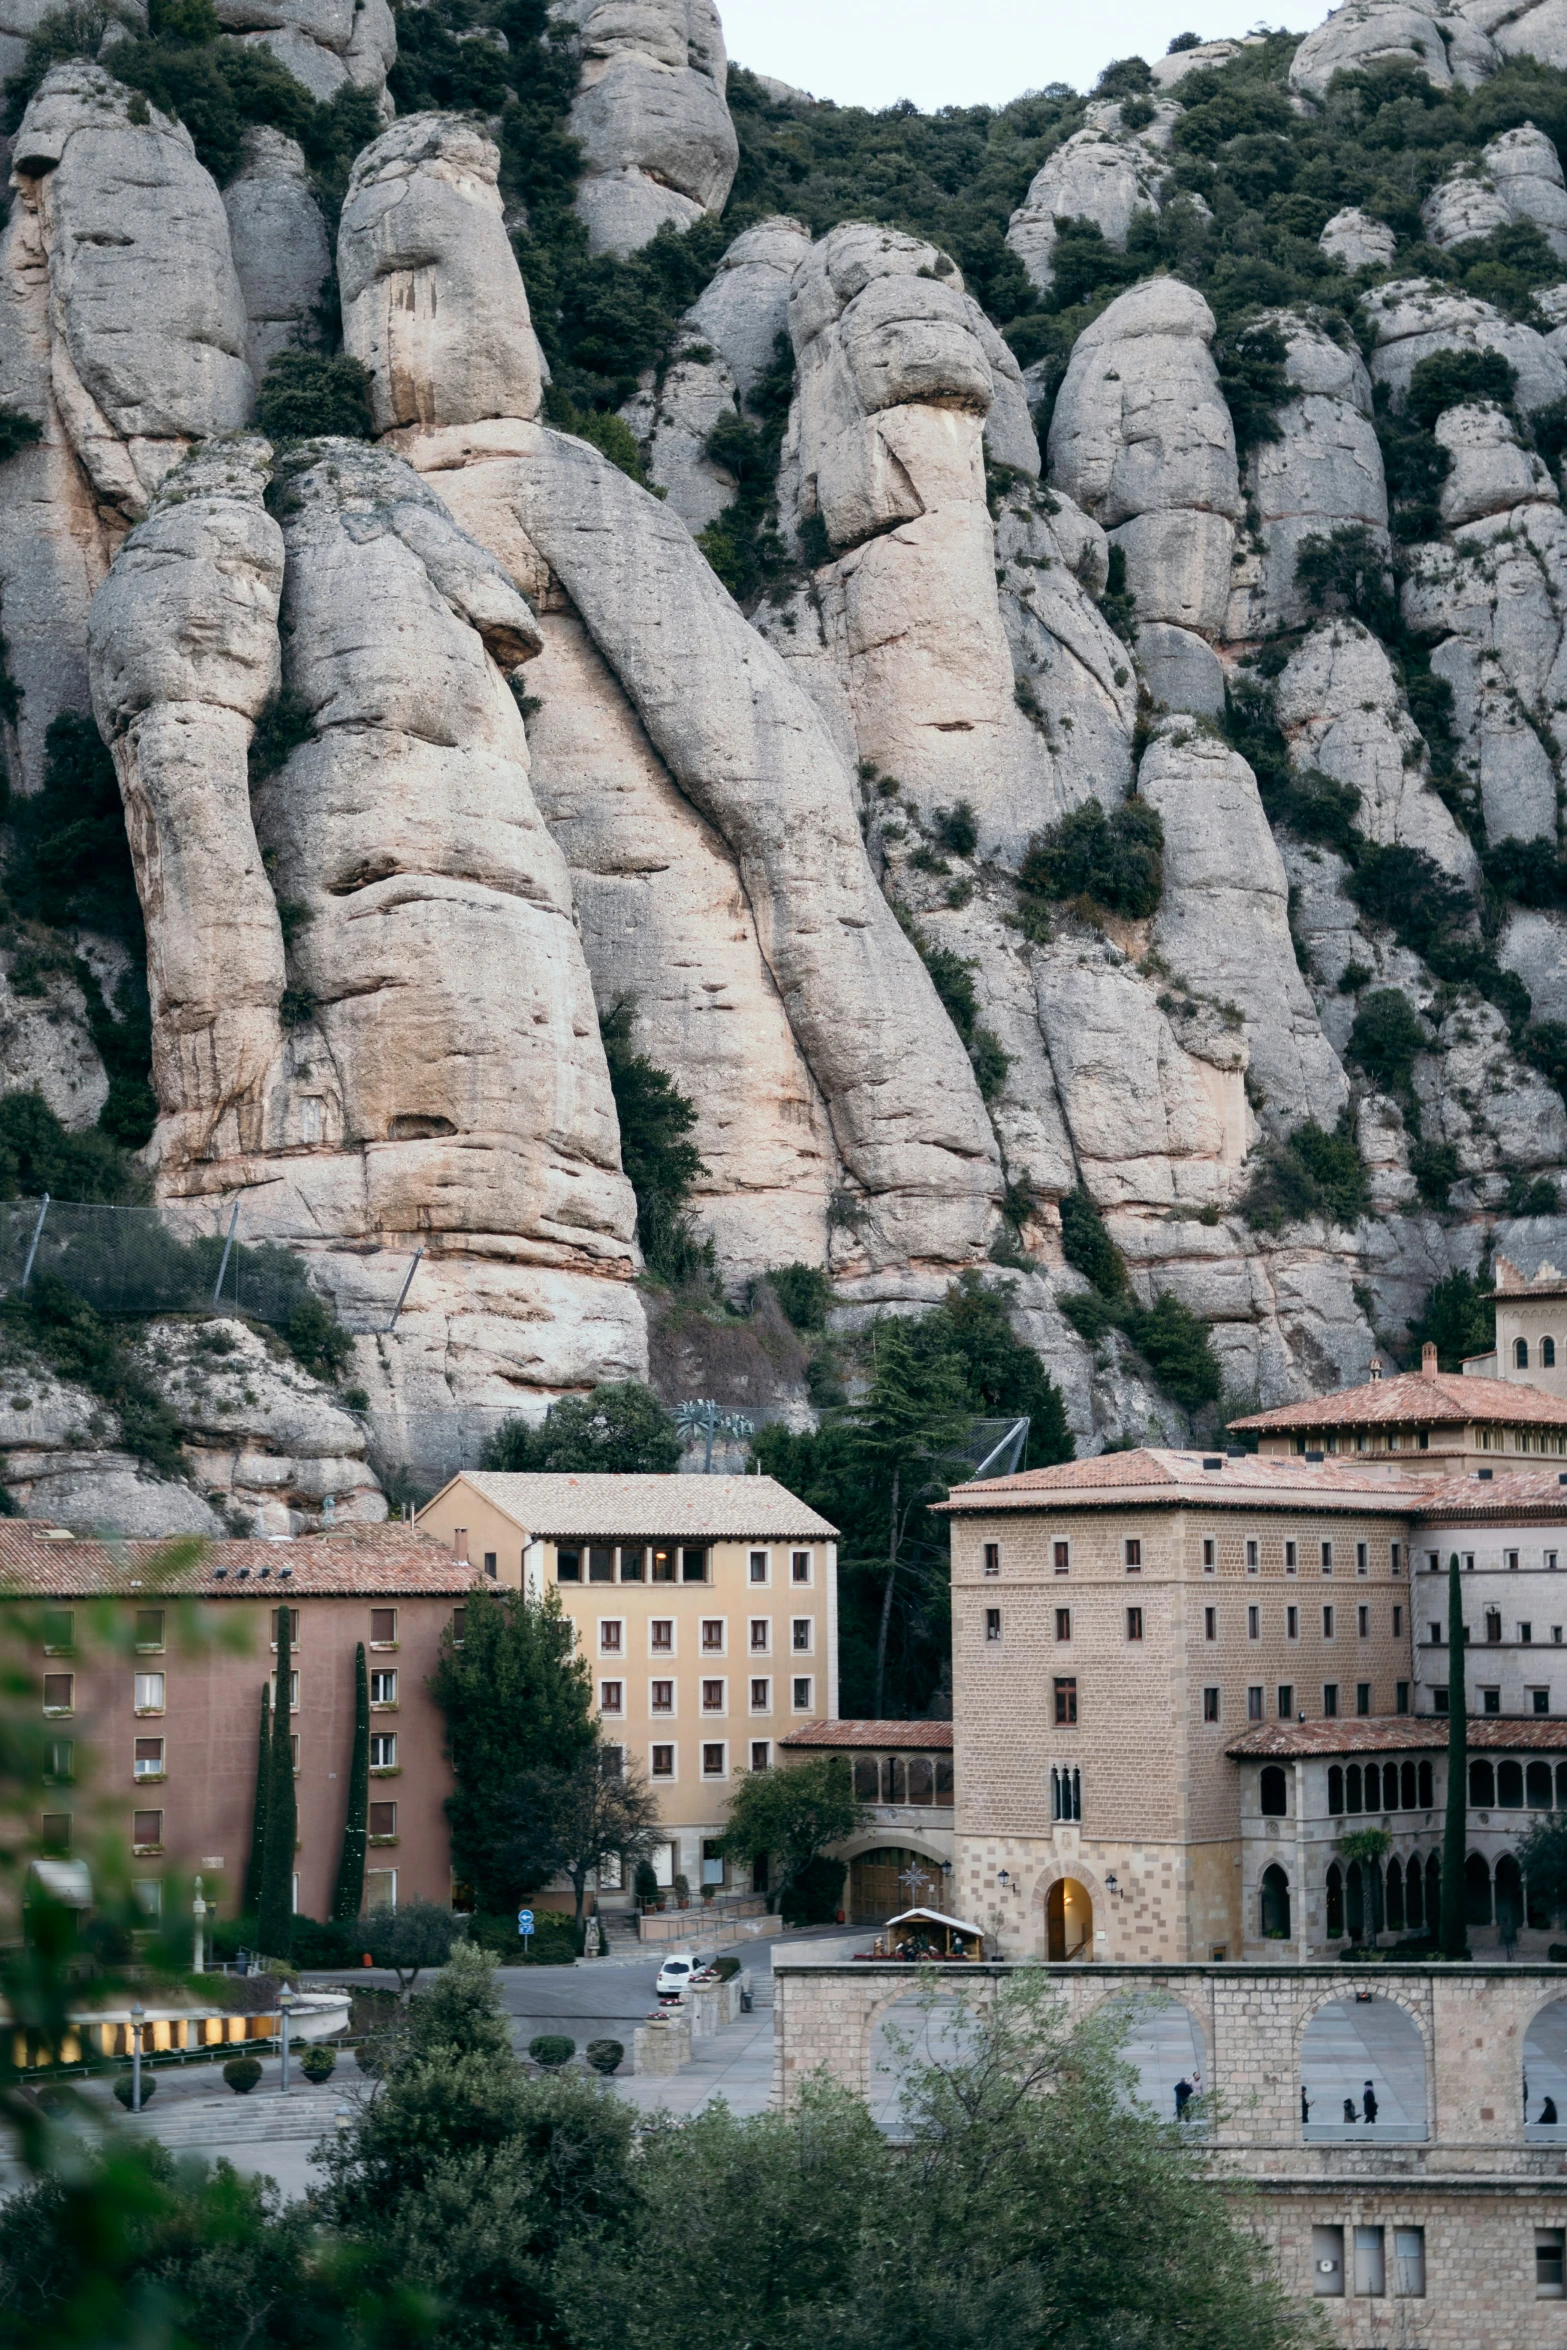 a very large rocky area next to a building in town